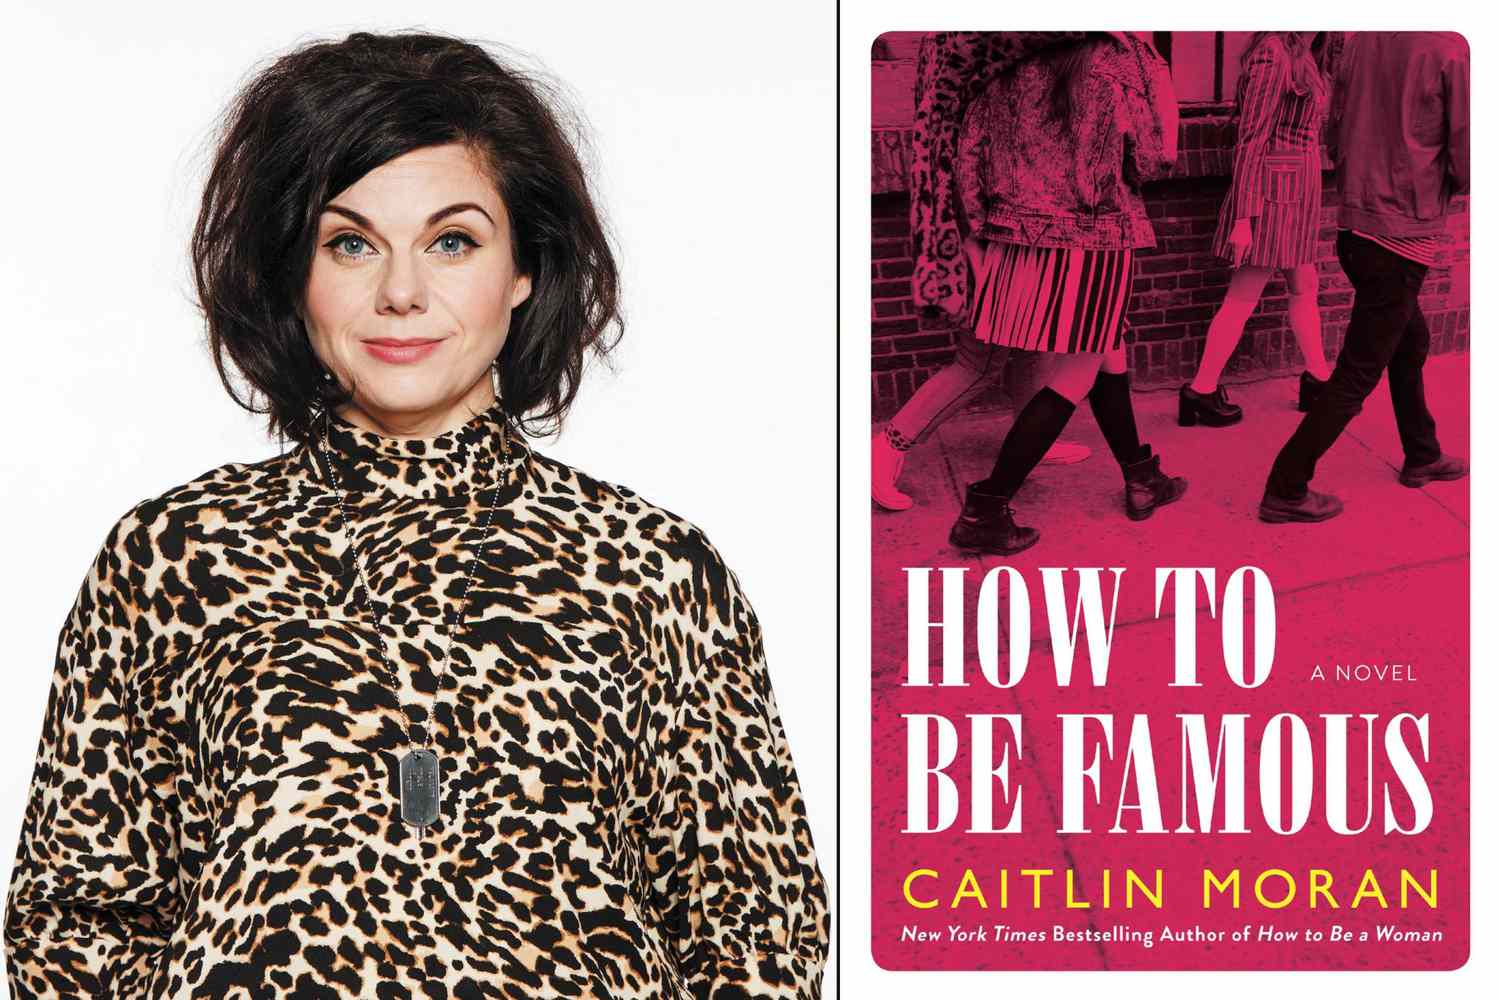 Caitlin Moran talks sex tapes, porn, and her new book How to Be Famous